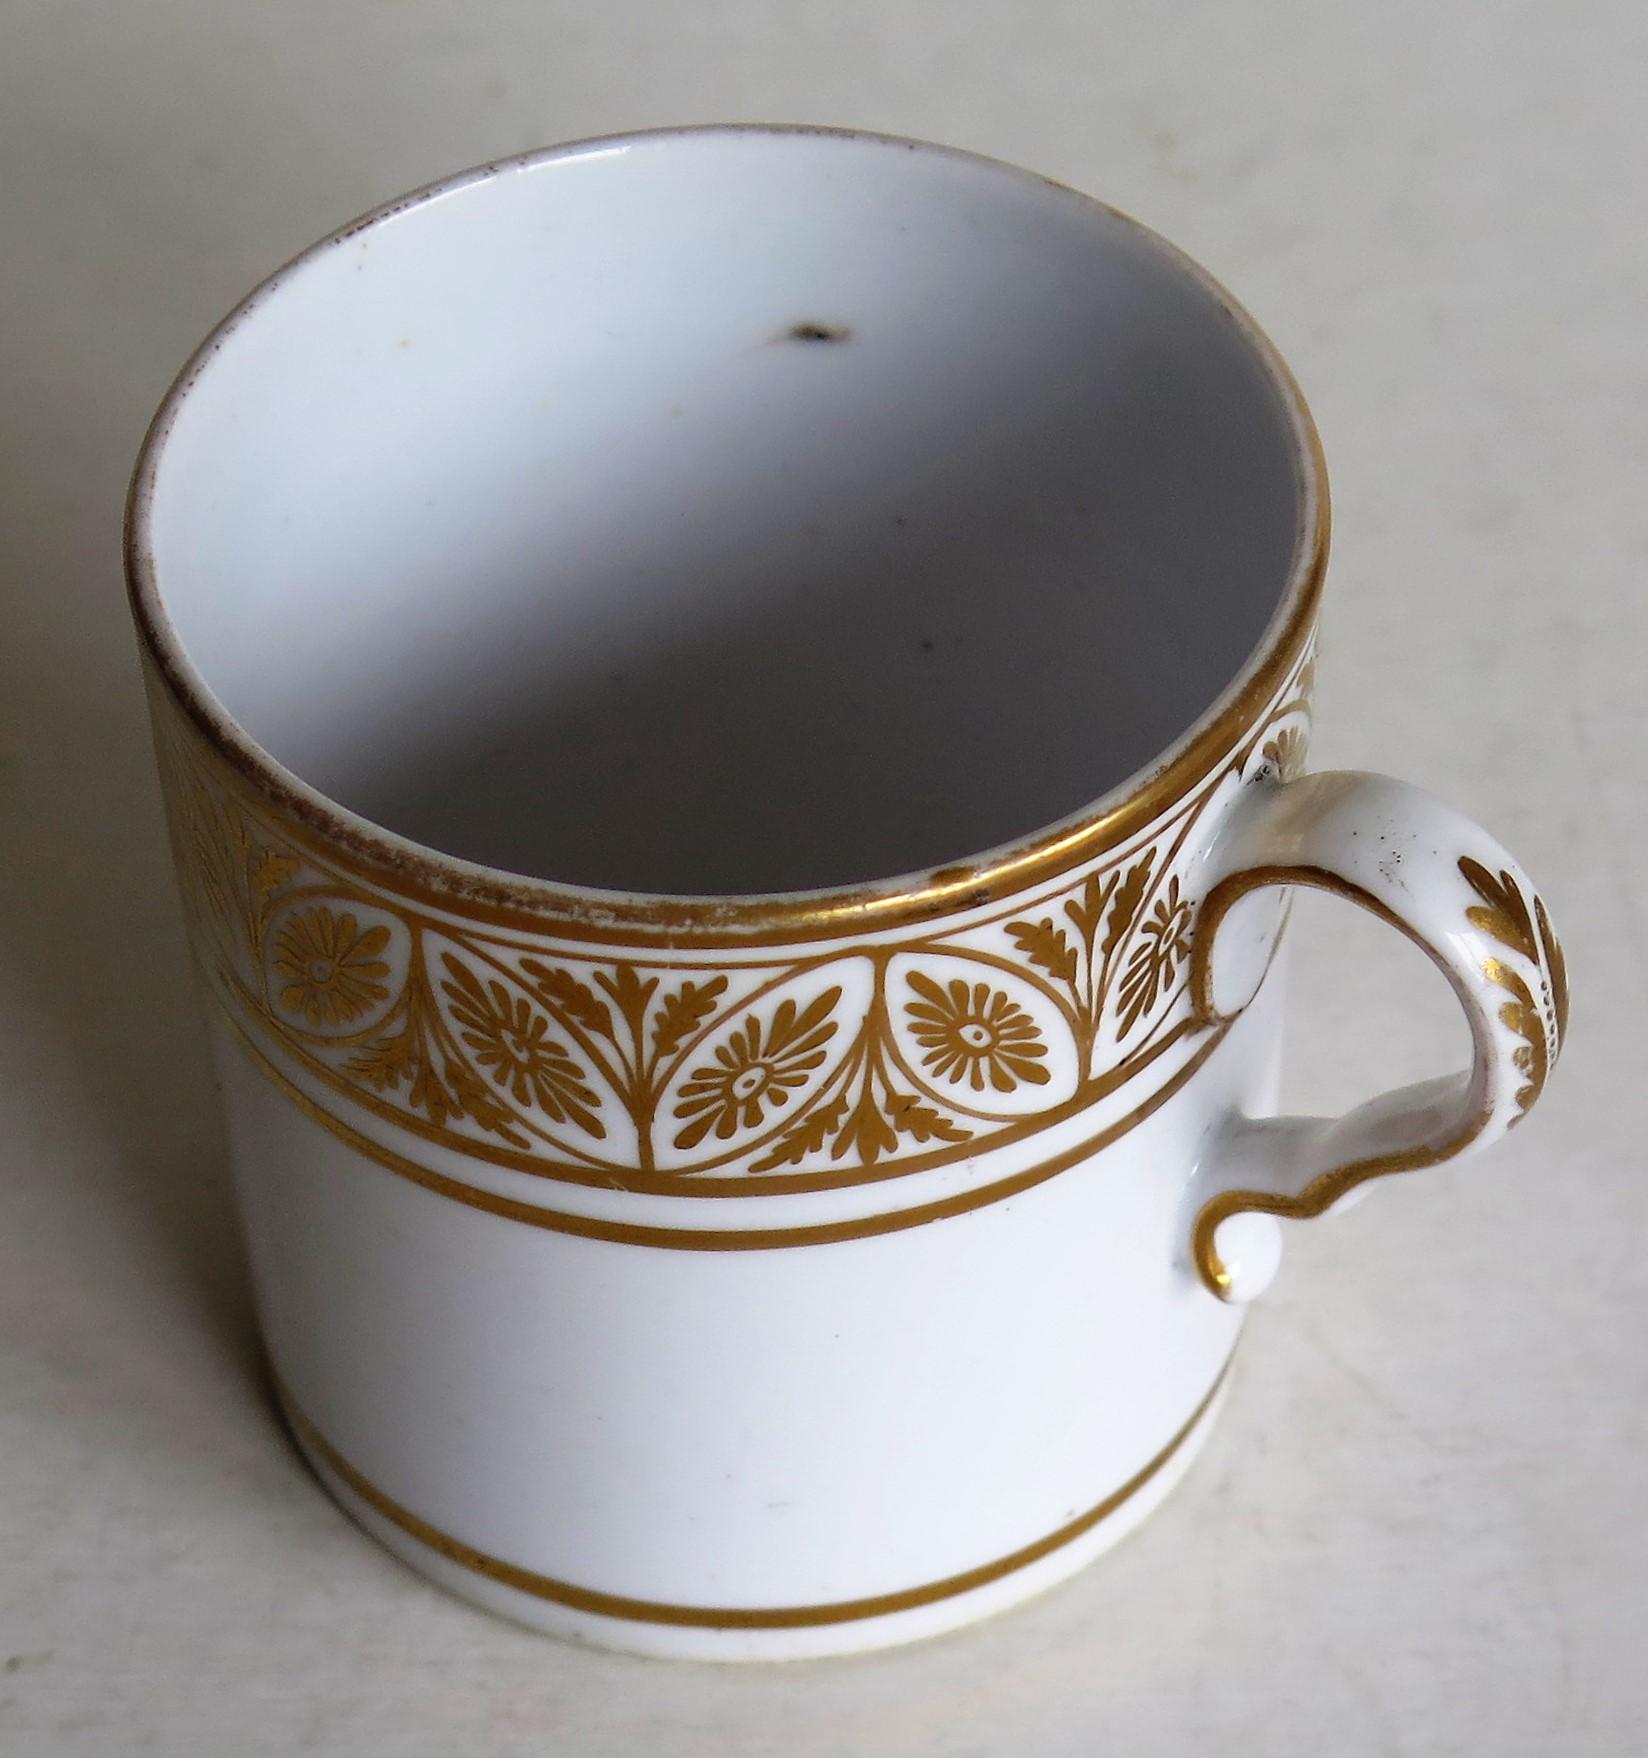 This is a good example of an English George III period, porcelain, coffee can (cup), made by Spode in the early 19th century, circa 1810.

The can is nominally straight sided and has the Spode loop handle with a pronounced kick or kink to the